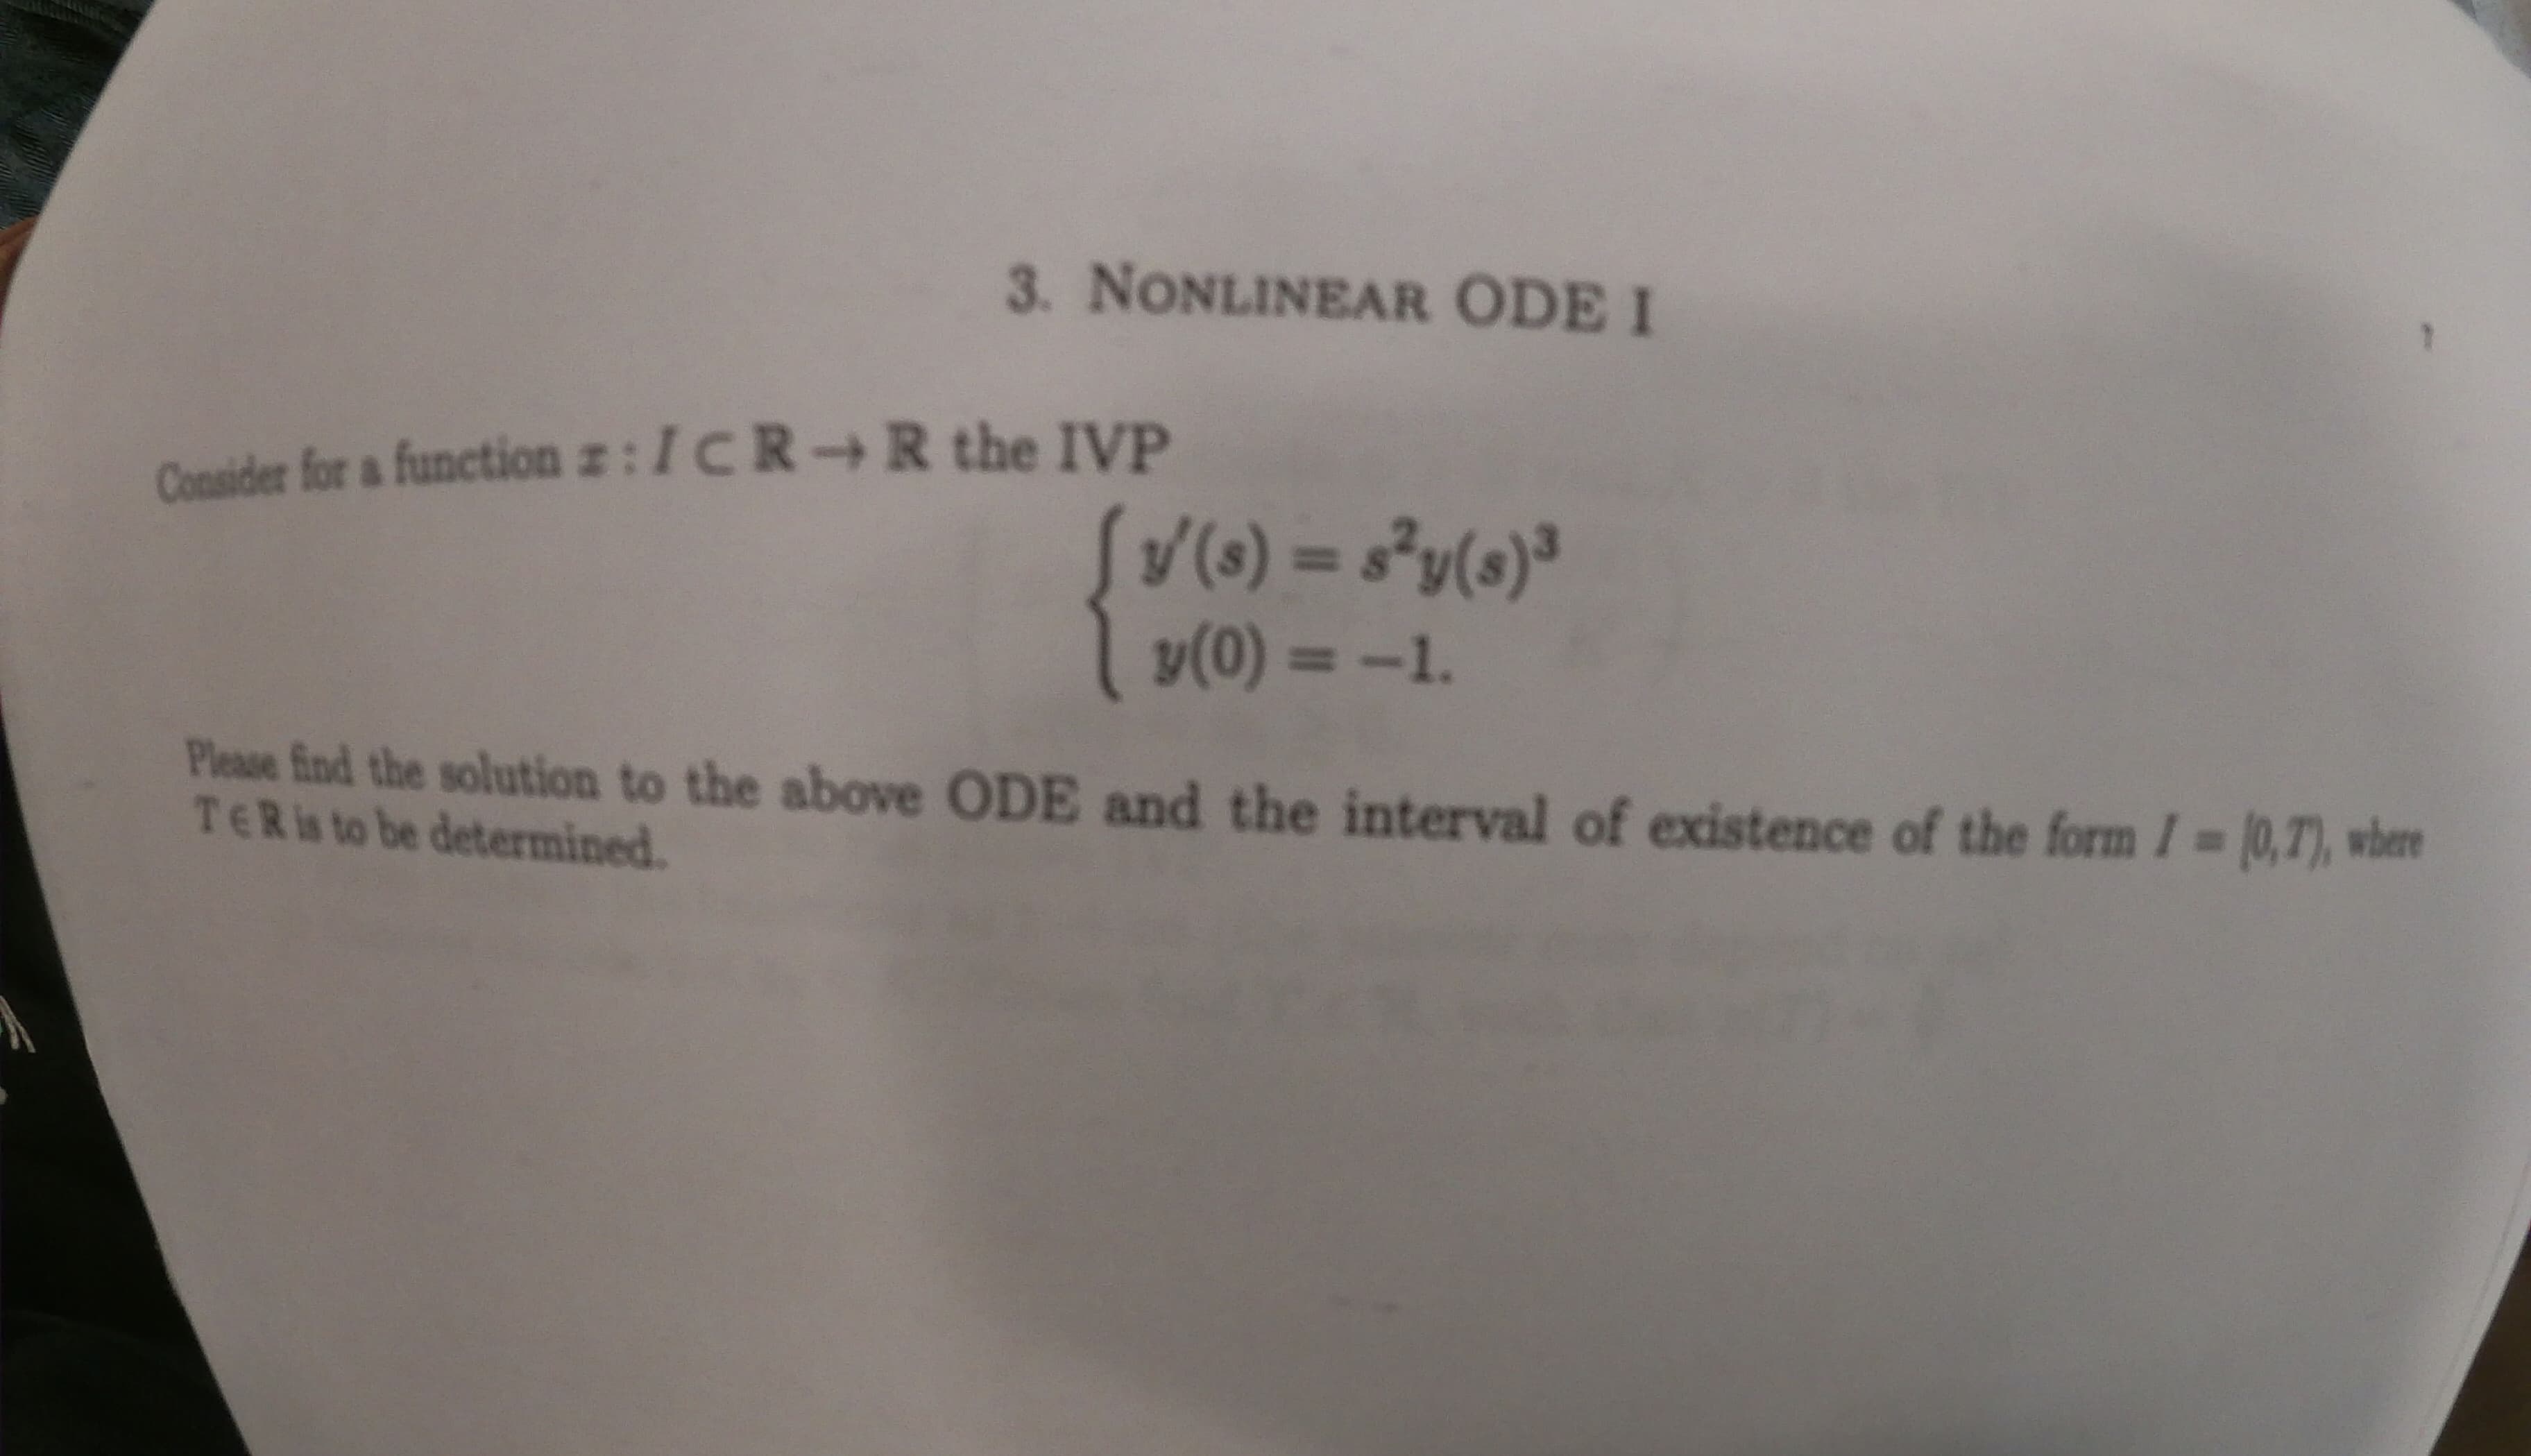 3. NONLINEAR ODE I
z:ICR+R the IVP
Consider for a function
f/() = Sy(e)3
y(0)=-1.
Please find the solution to the above ODE and the interval of existence of the form I (0,T), wbere
TERis to be determined
